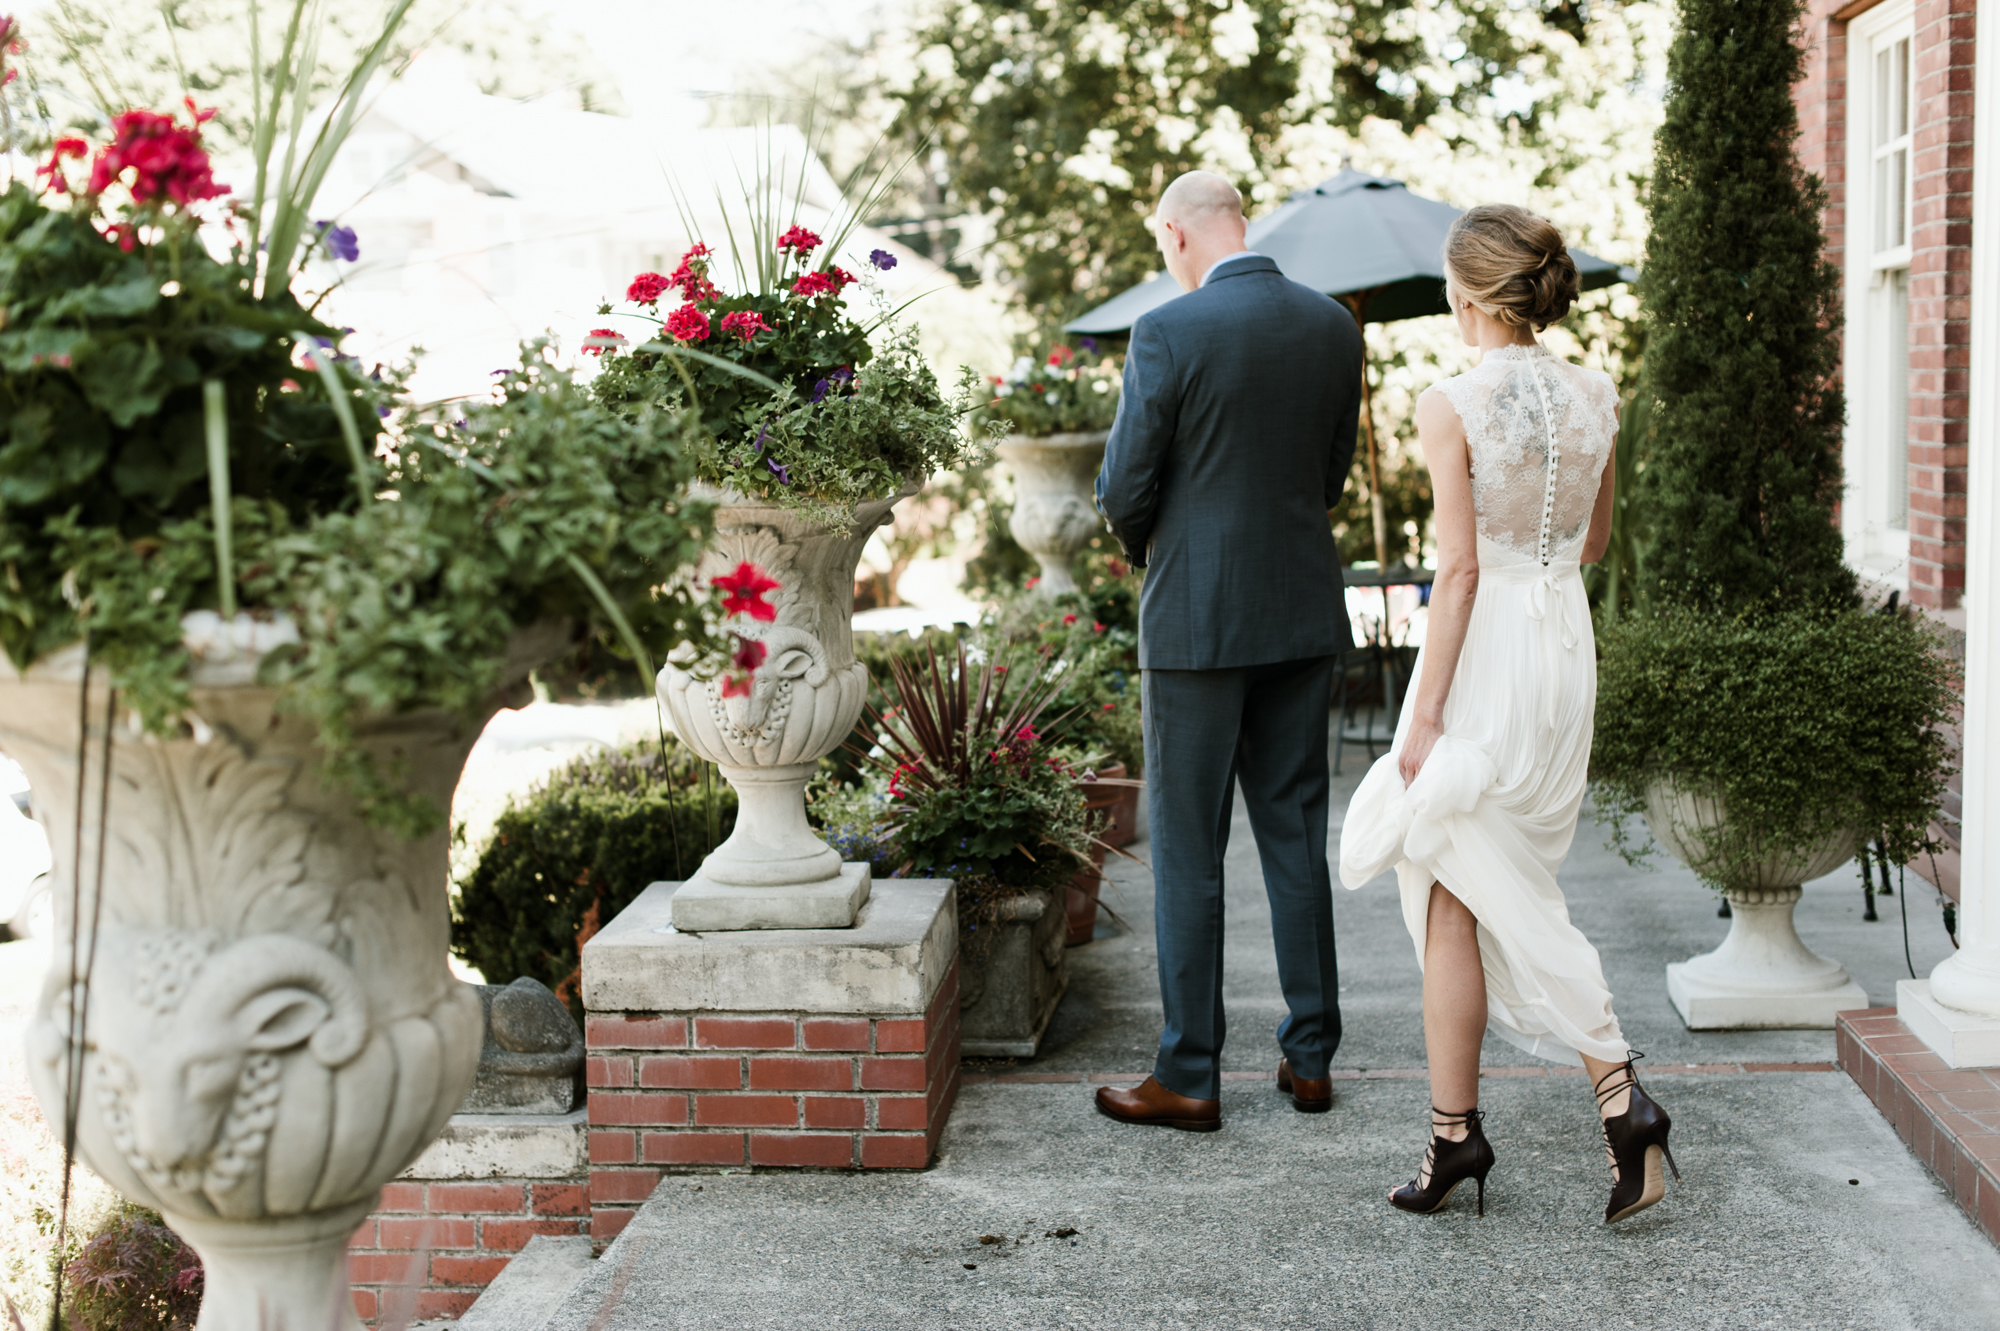 The bride and groom prepare for their first look at the Portland Mayor's Mansion. By Laurelhurst Park wedding photographer Briana Morrison